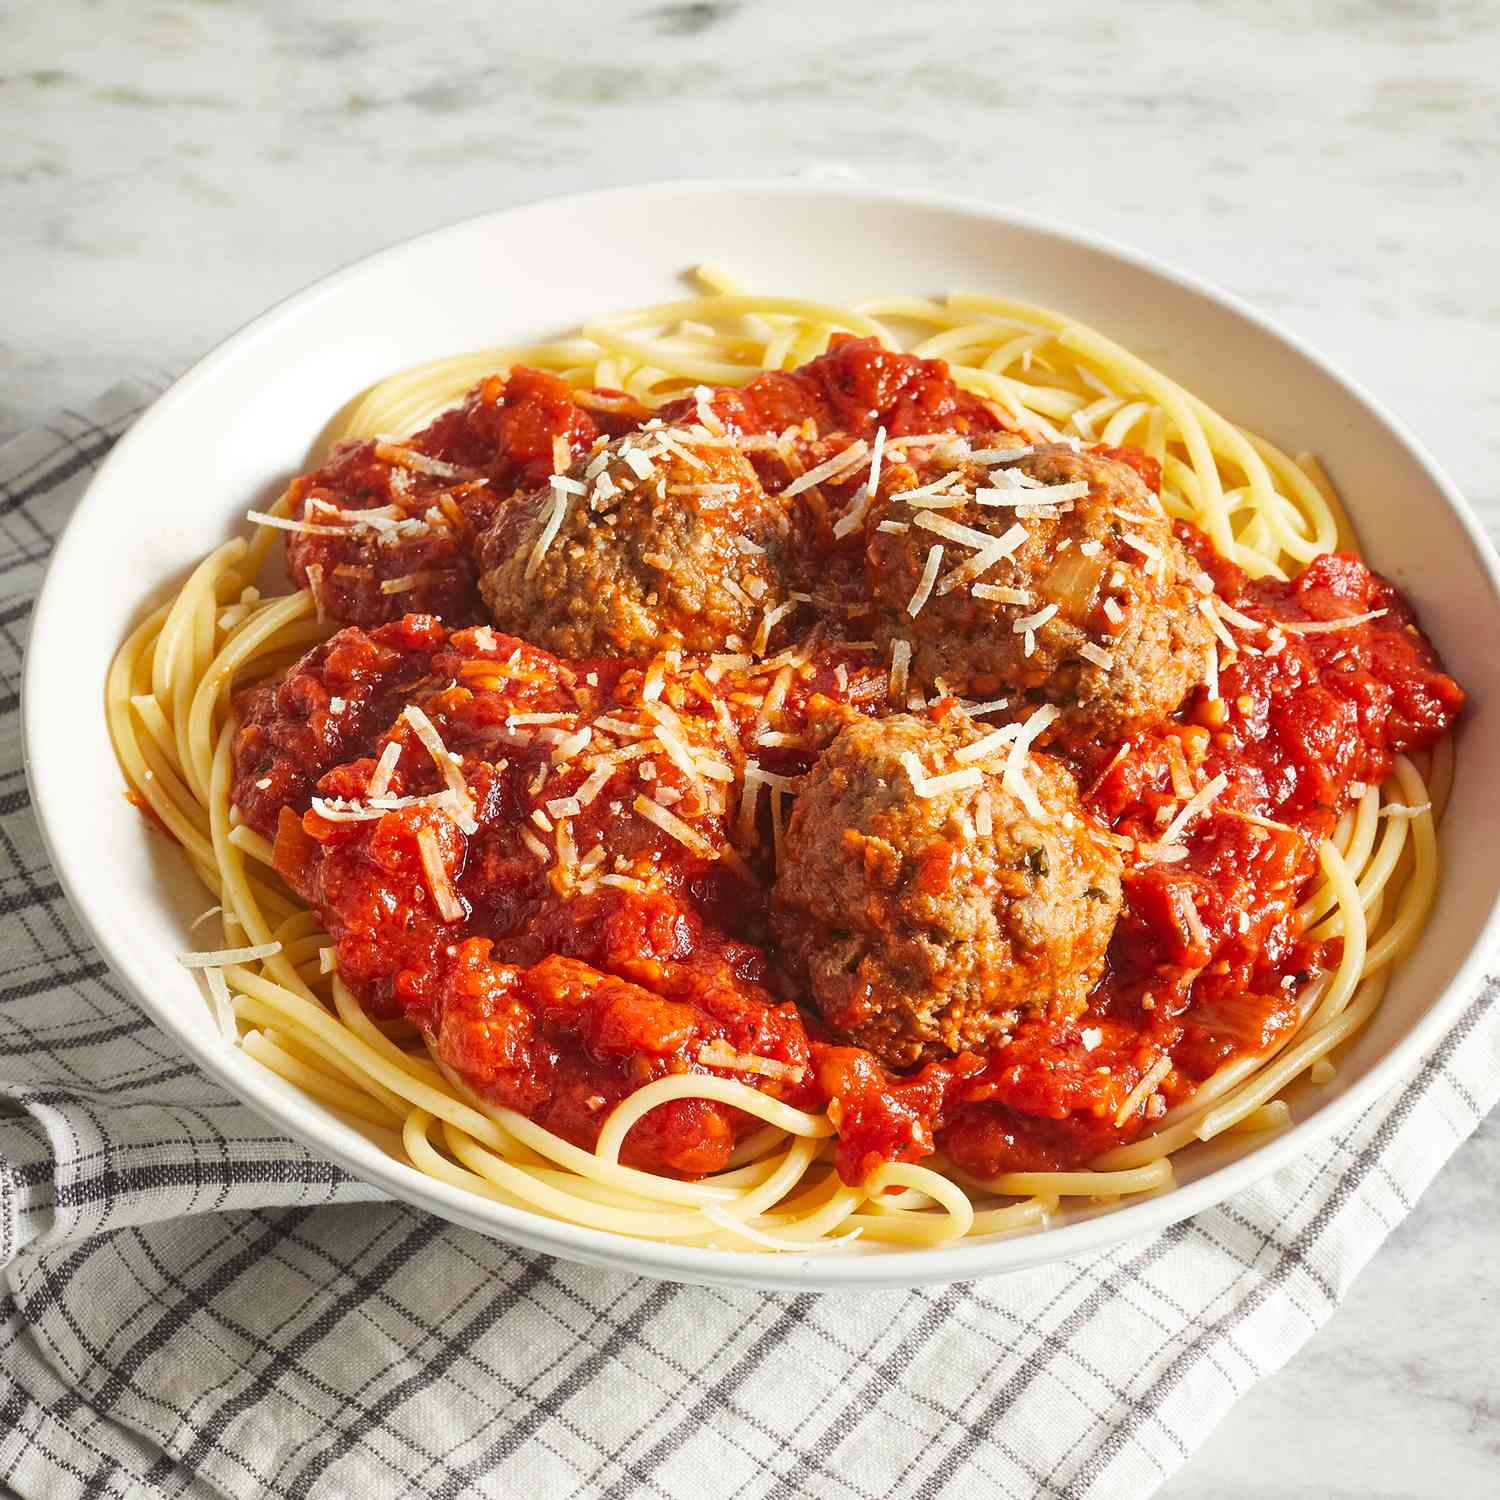 a low angle view looking into a single serving of spaghetti topped with a red sauce, meatballs, and parmesan cheese.